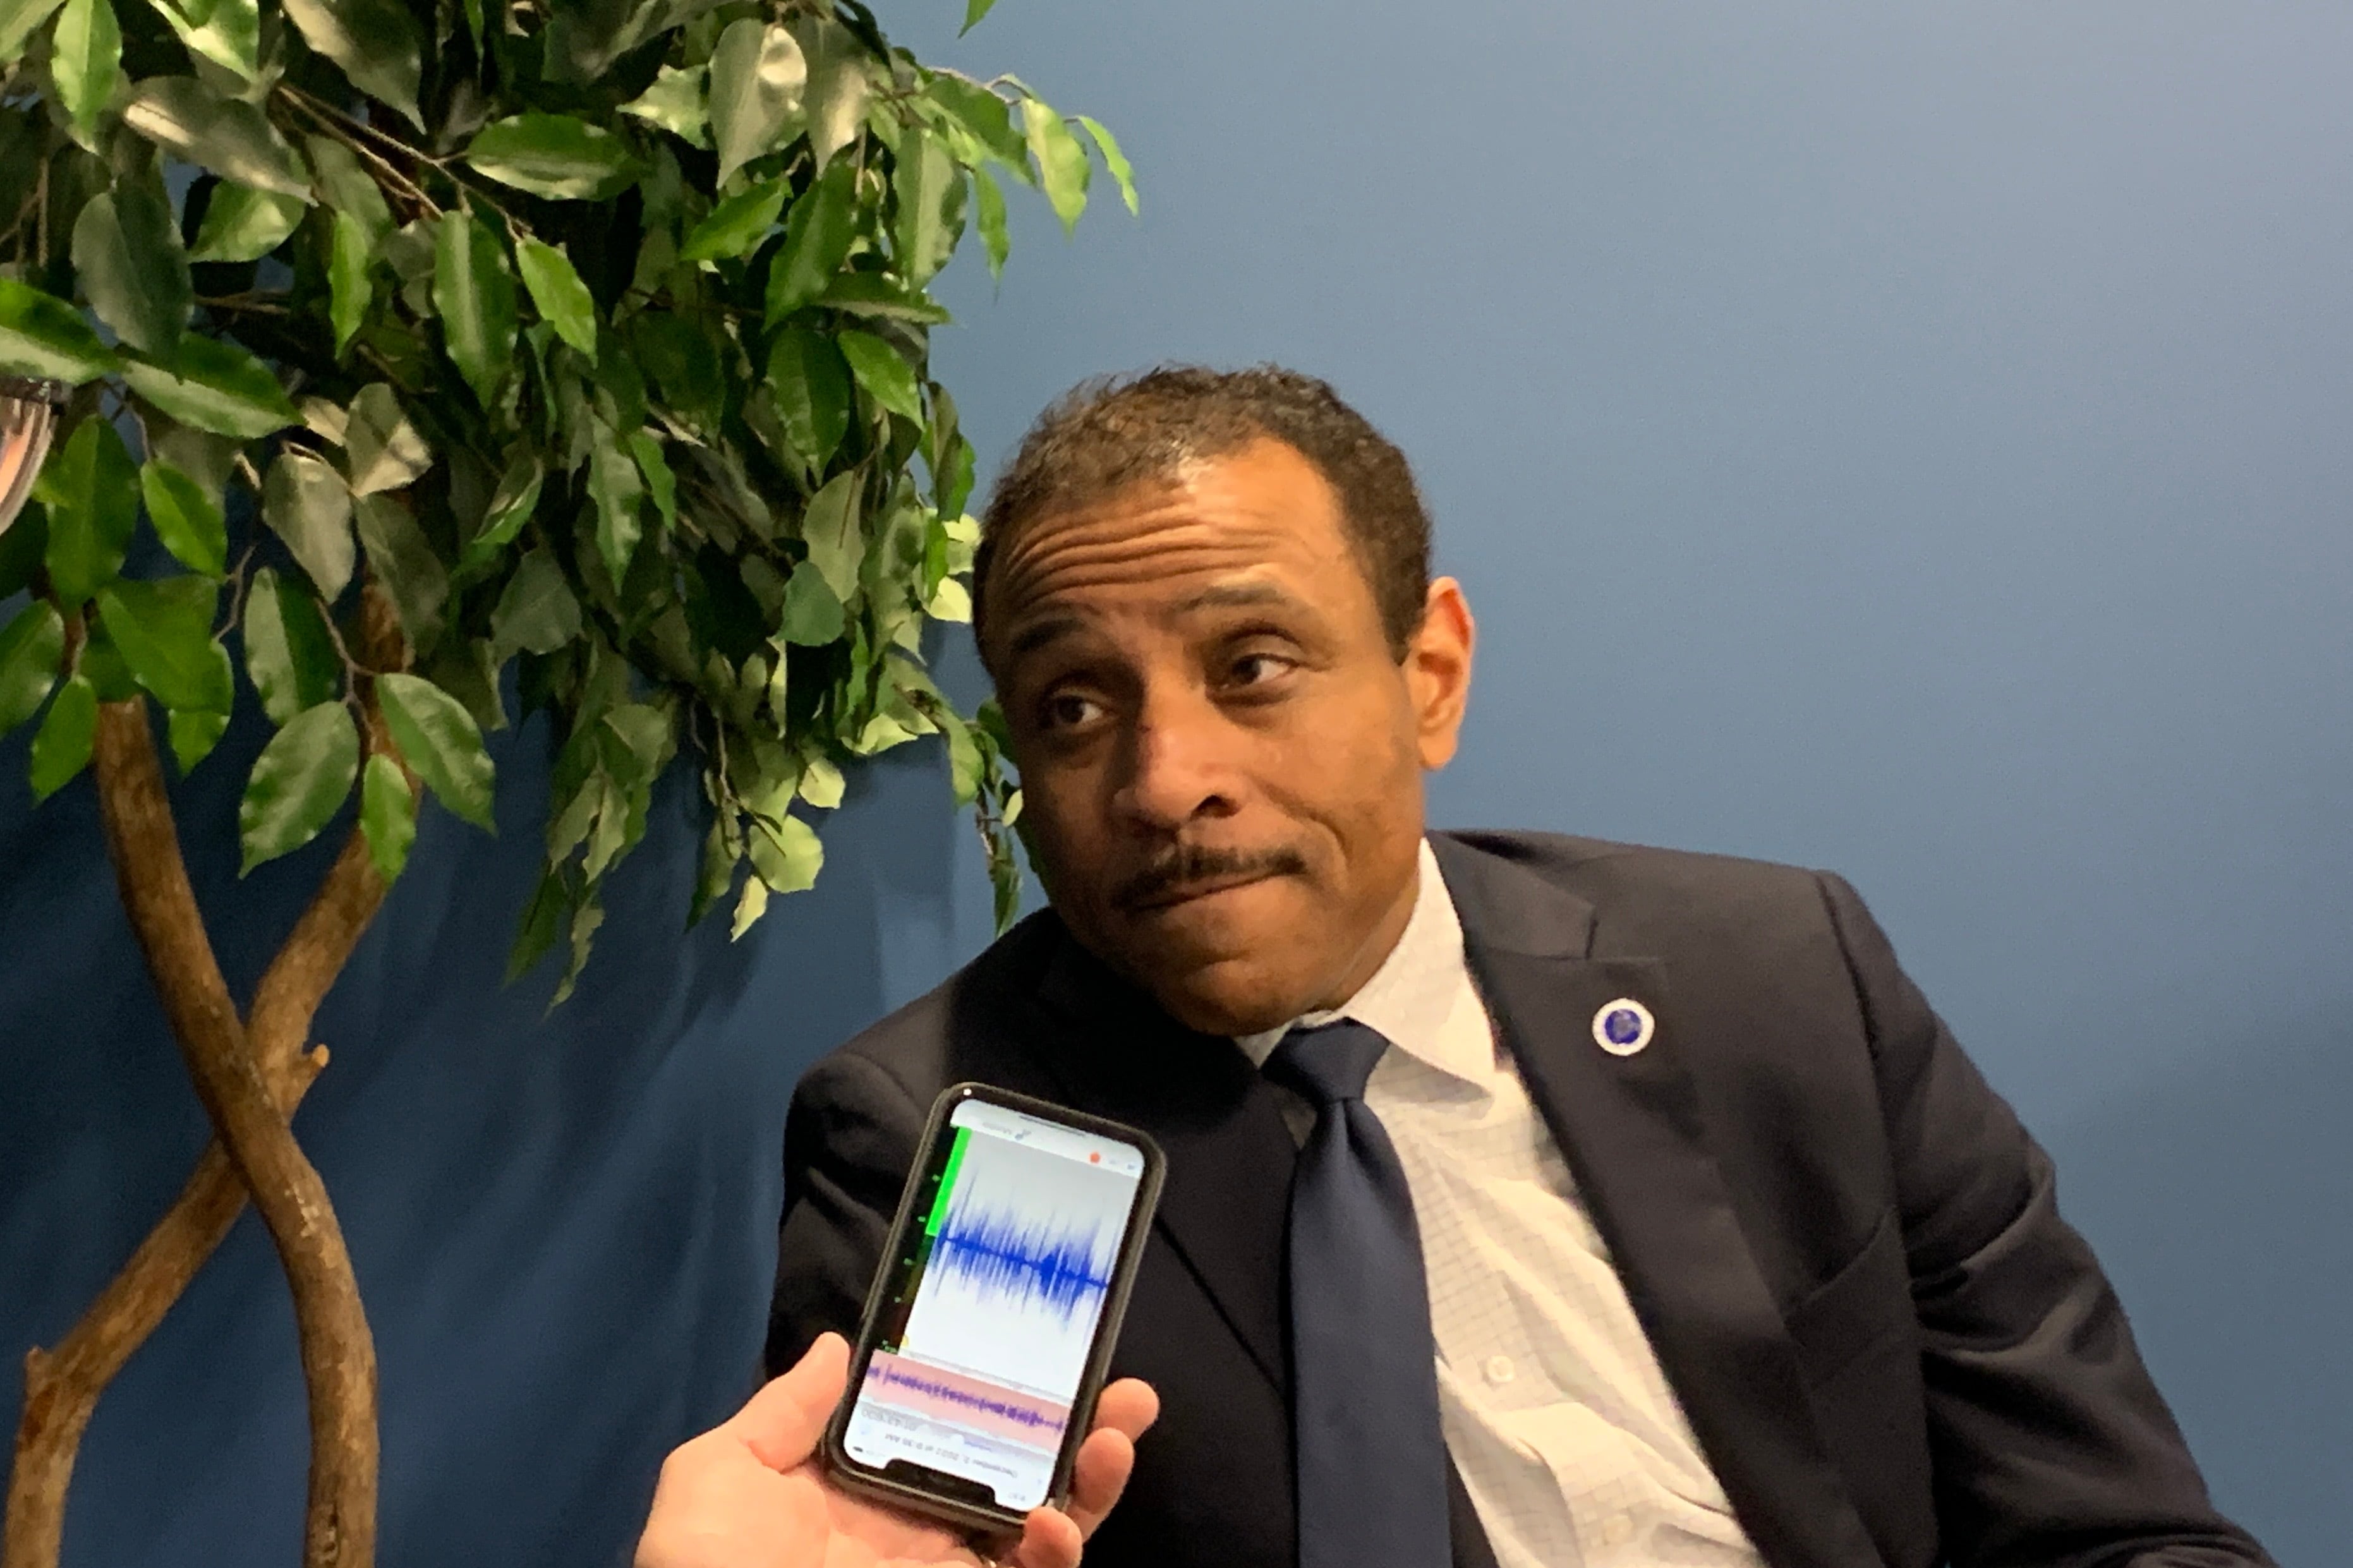 A man in a dark suit and white shirt leans to his right while a person holds a phone near his face in front of a plant a blue wall.